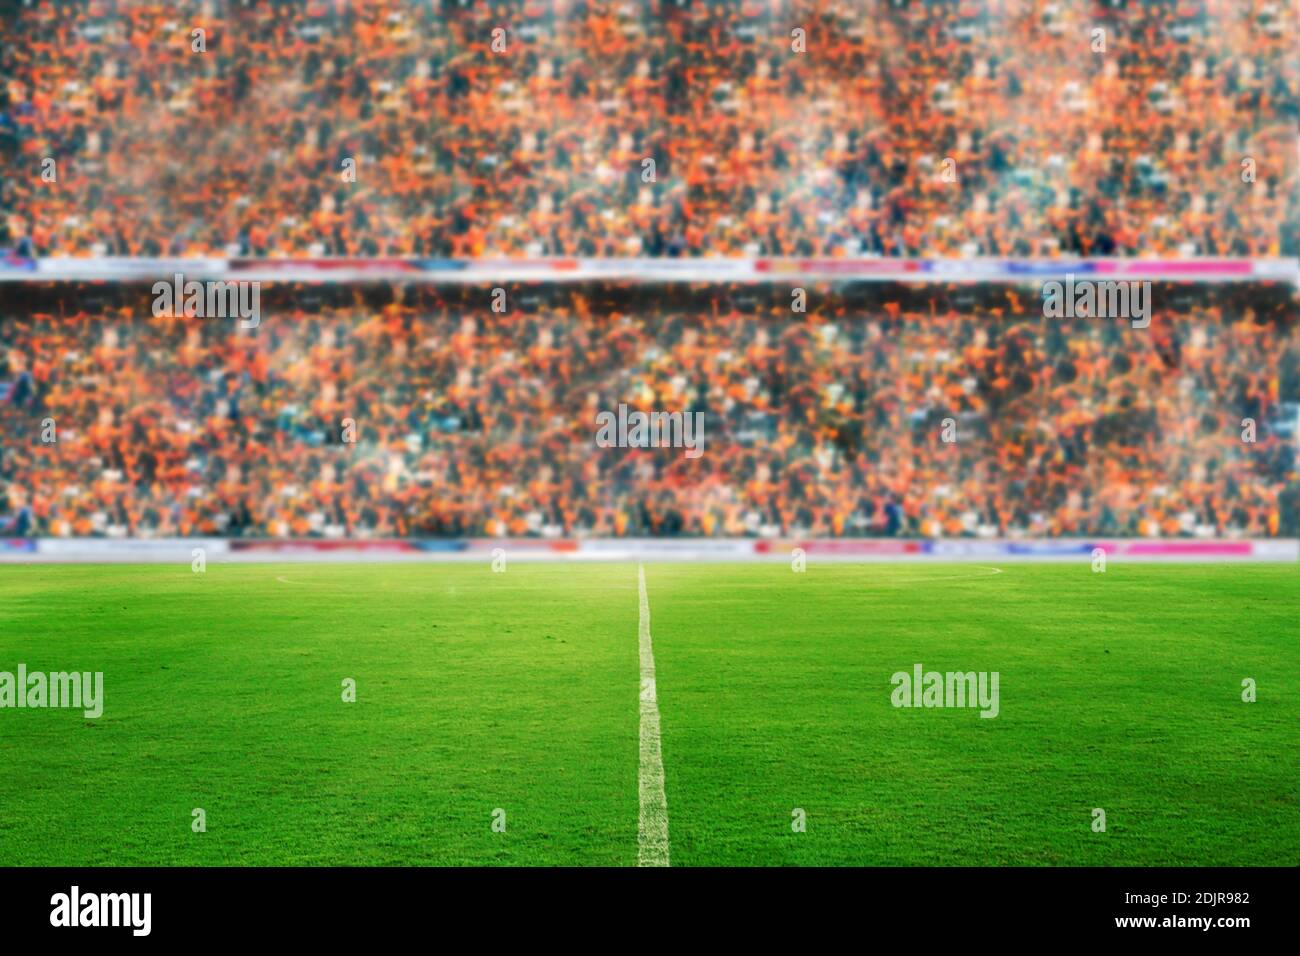 View Of Soccer Field With People In Background Stock Photo - Alamy